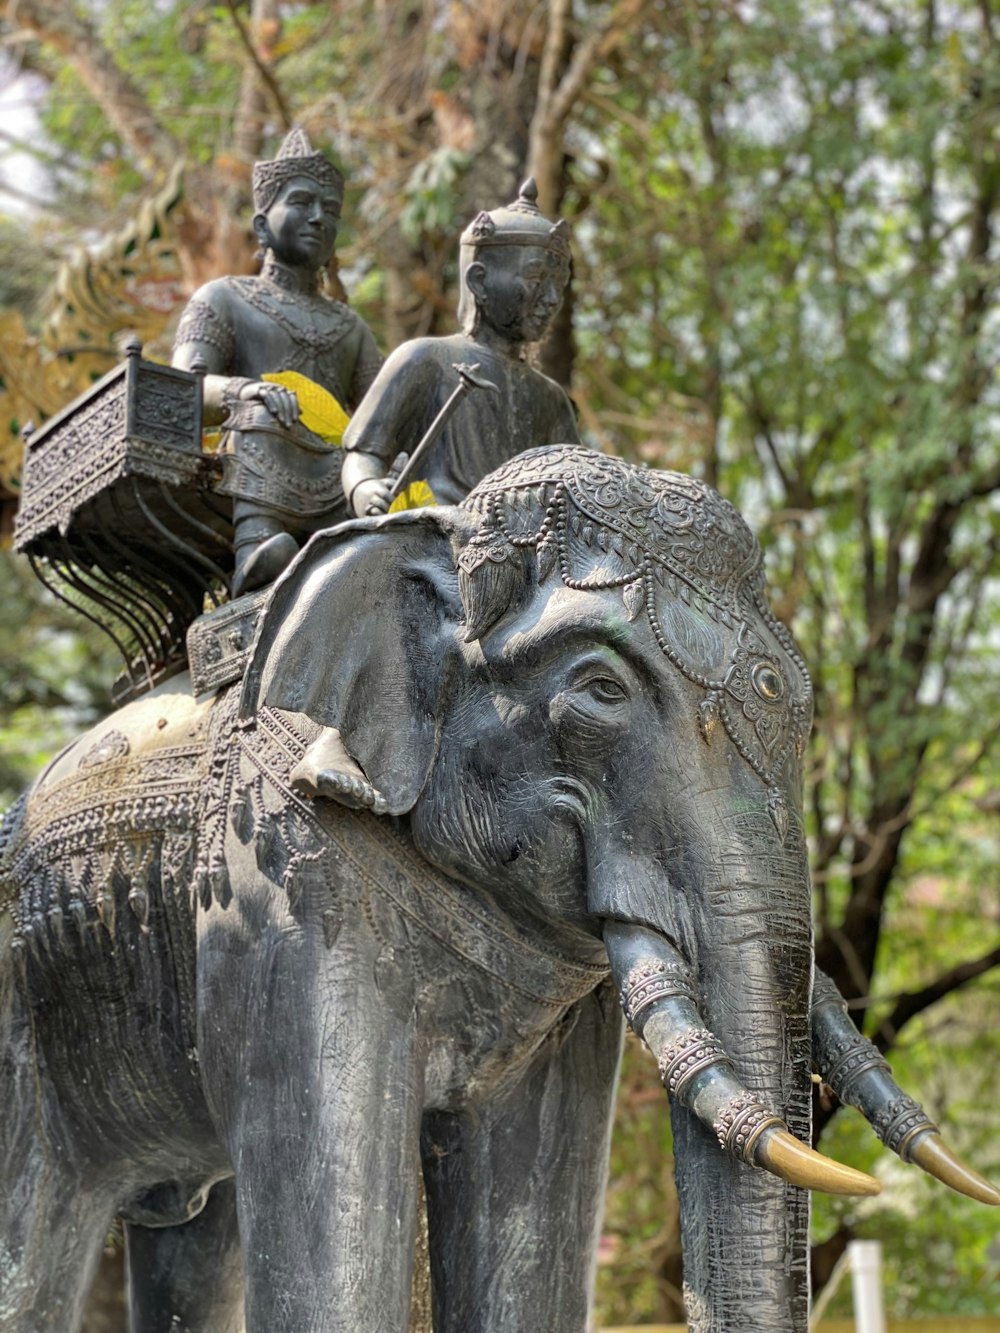 a statue of a man riding on the back of an elephant